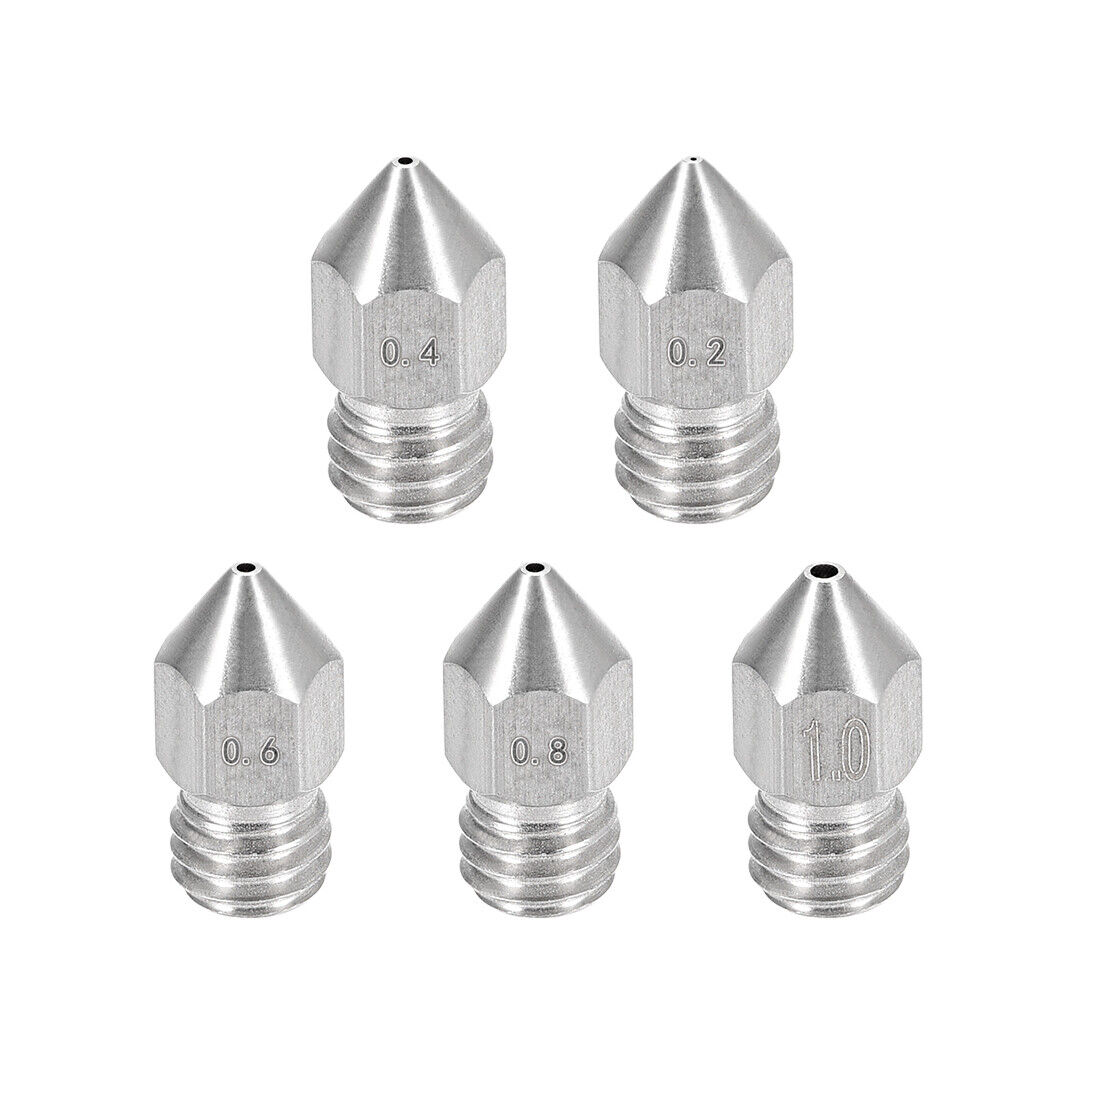 3D Printer Nozzle Fit for MK8, Stainless Steel, 0.2mm - 1mm Total 5pcs